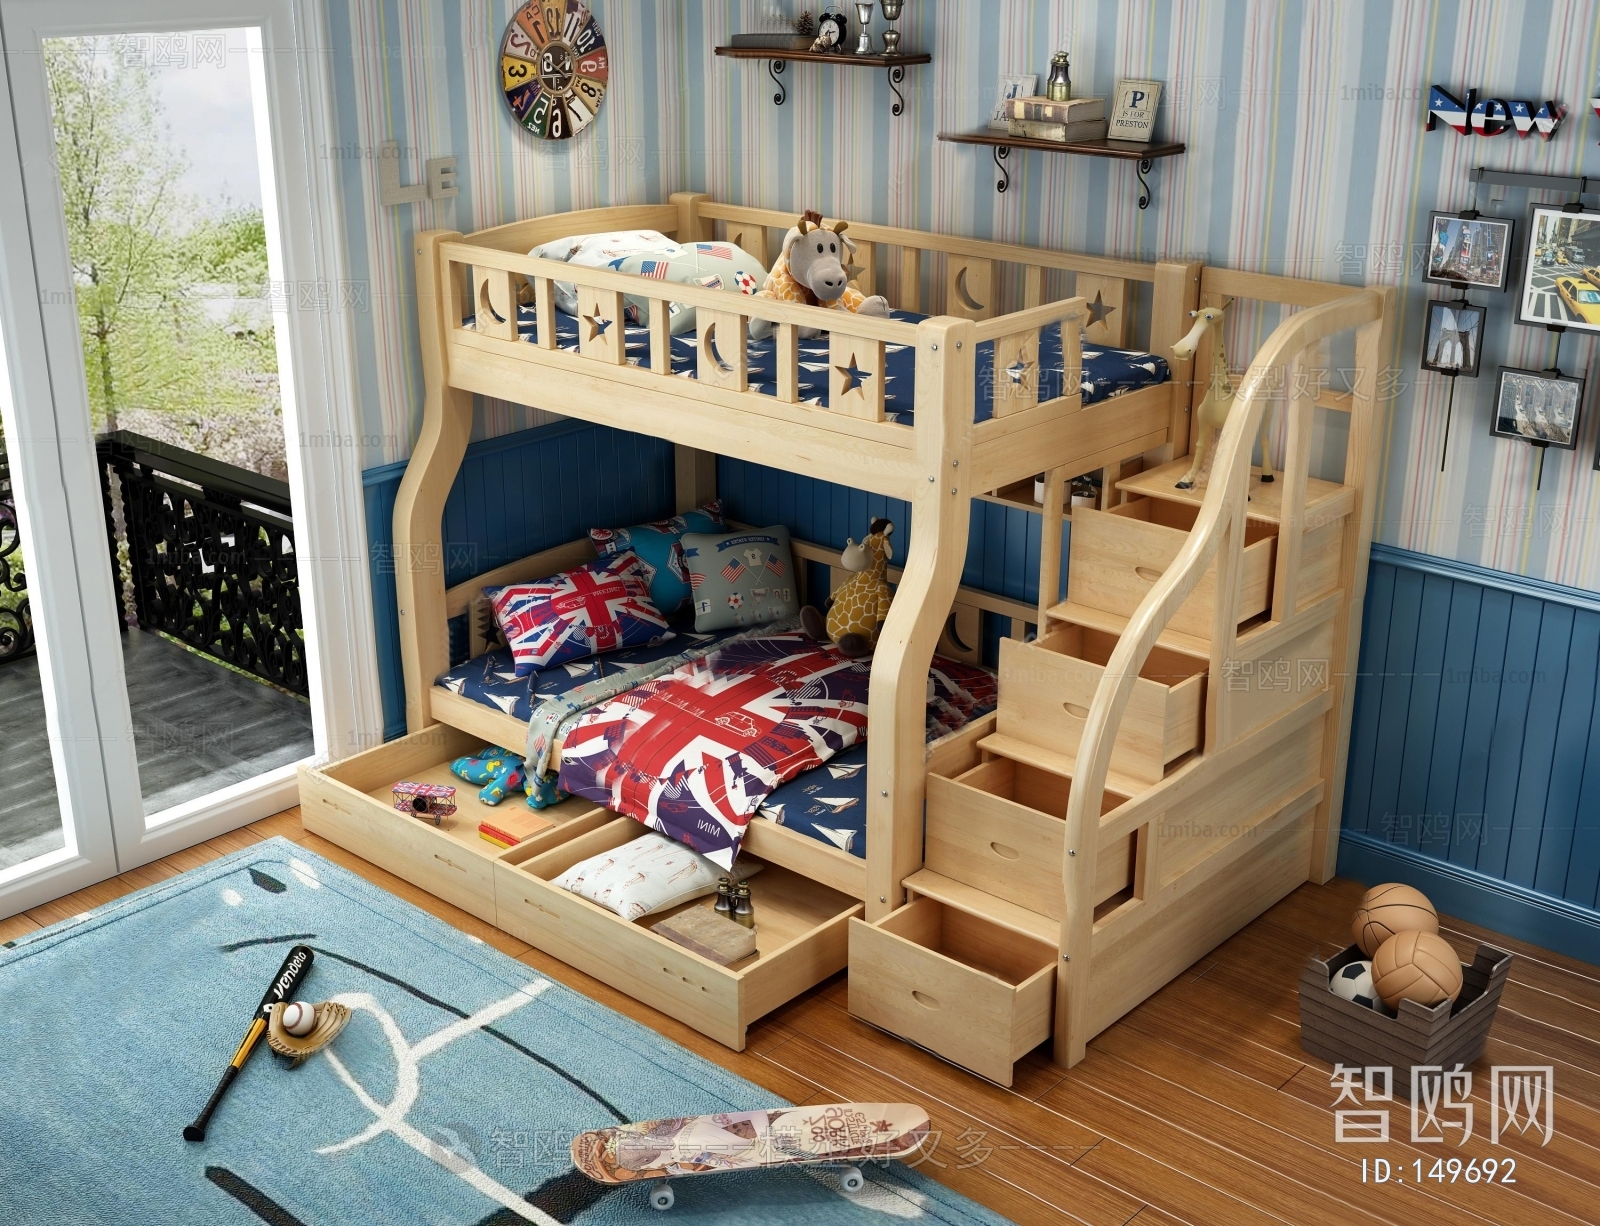 European Style Bunk Bed